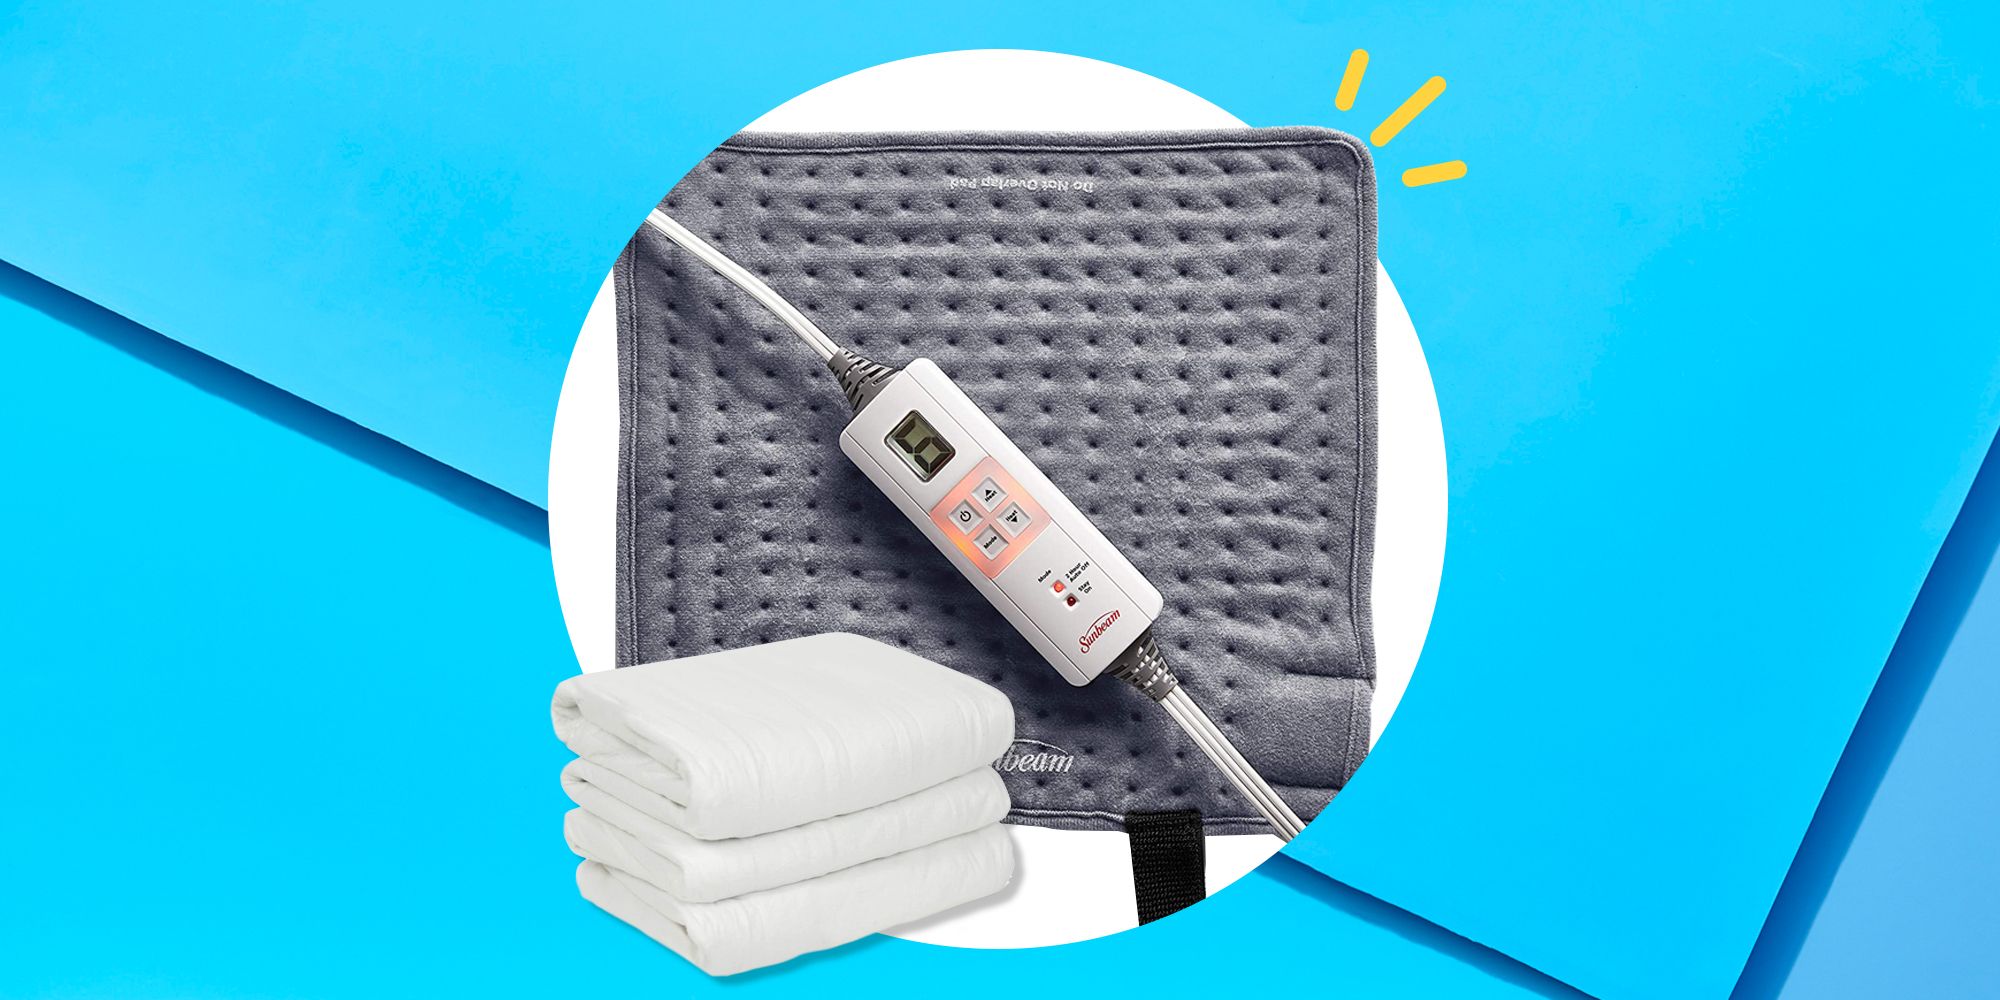 11 Best Heating Pads For Back, Neck, And Shoulder Pain In 2021